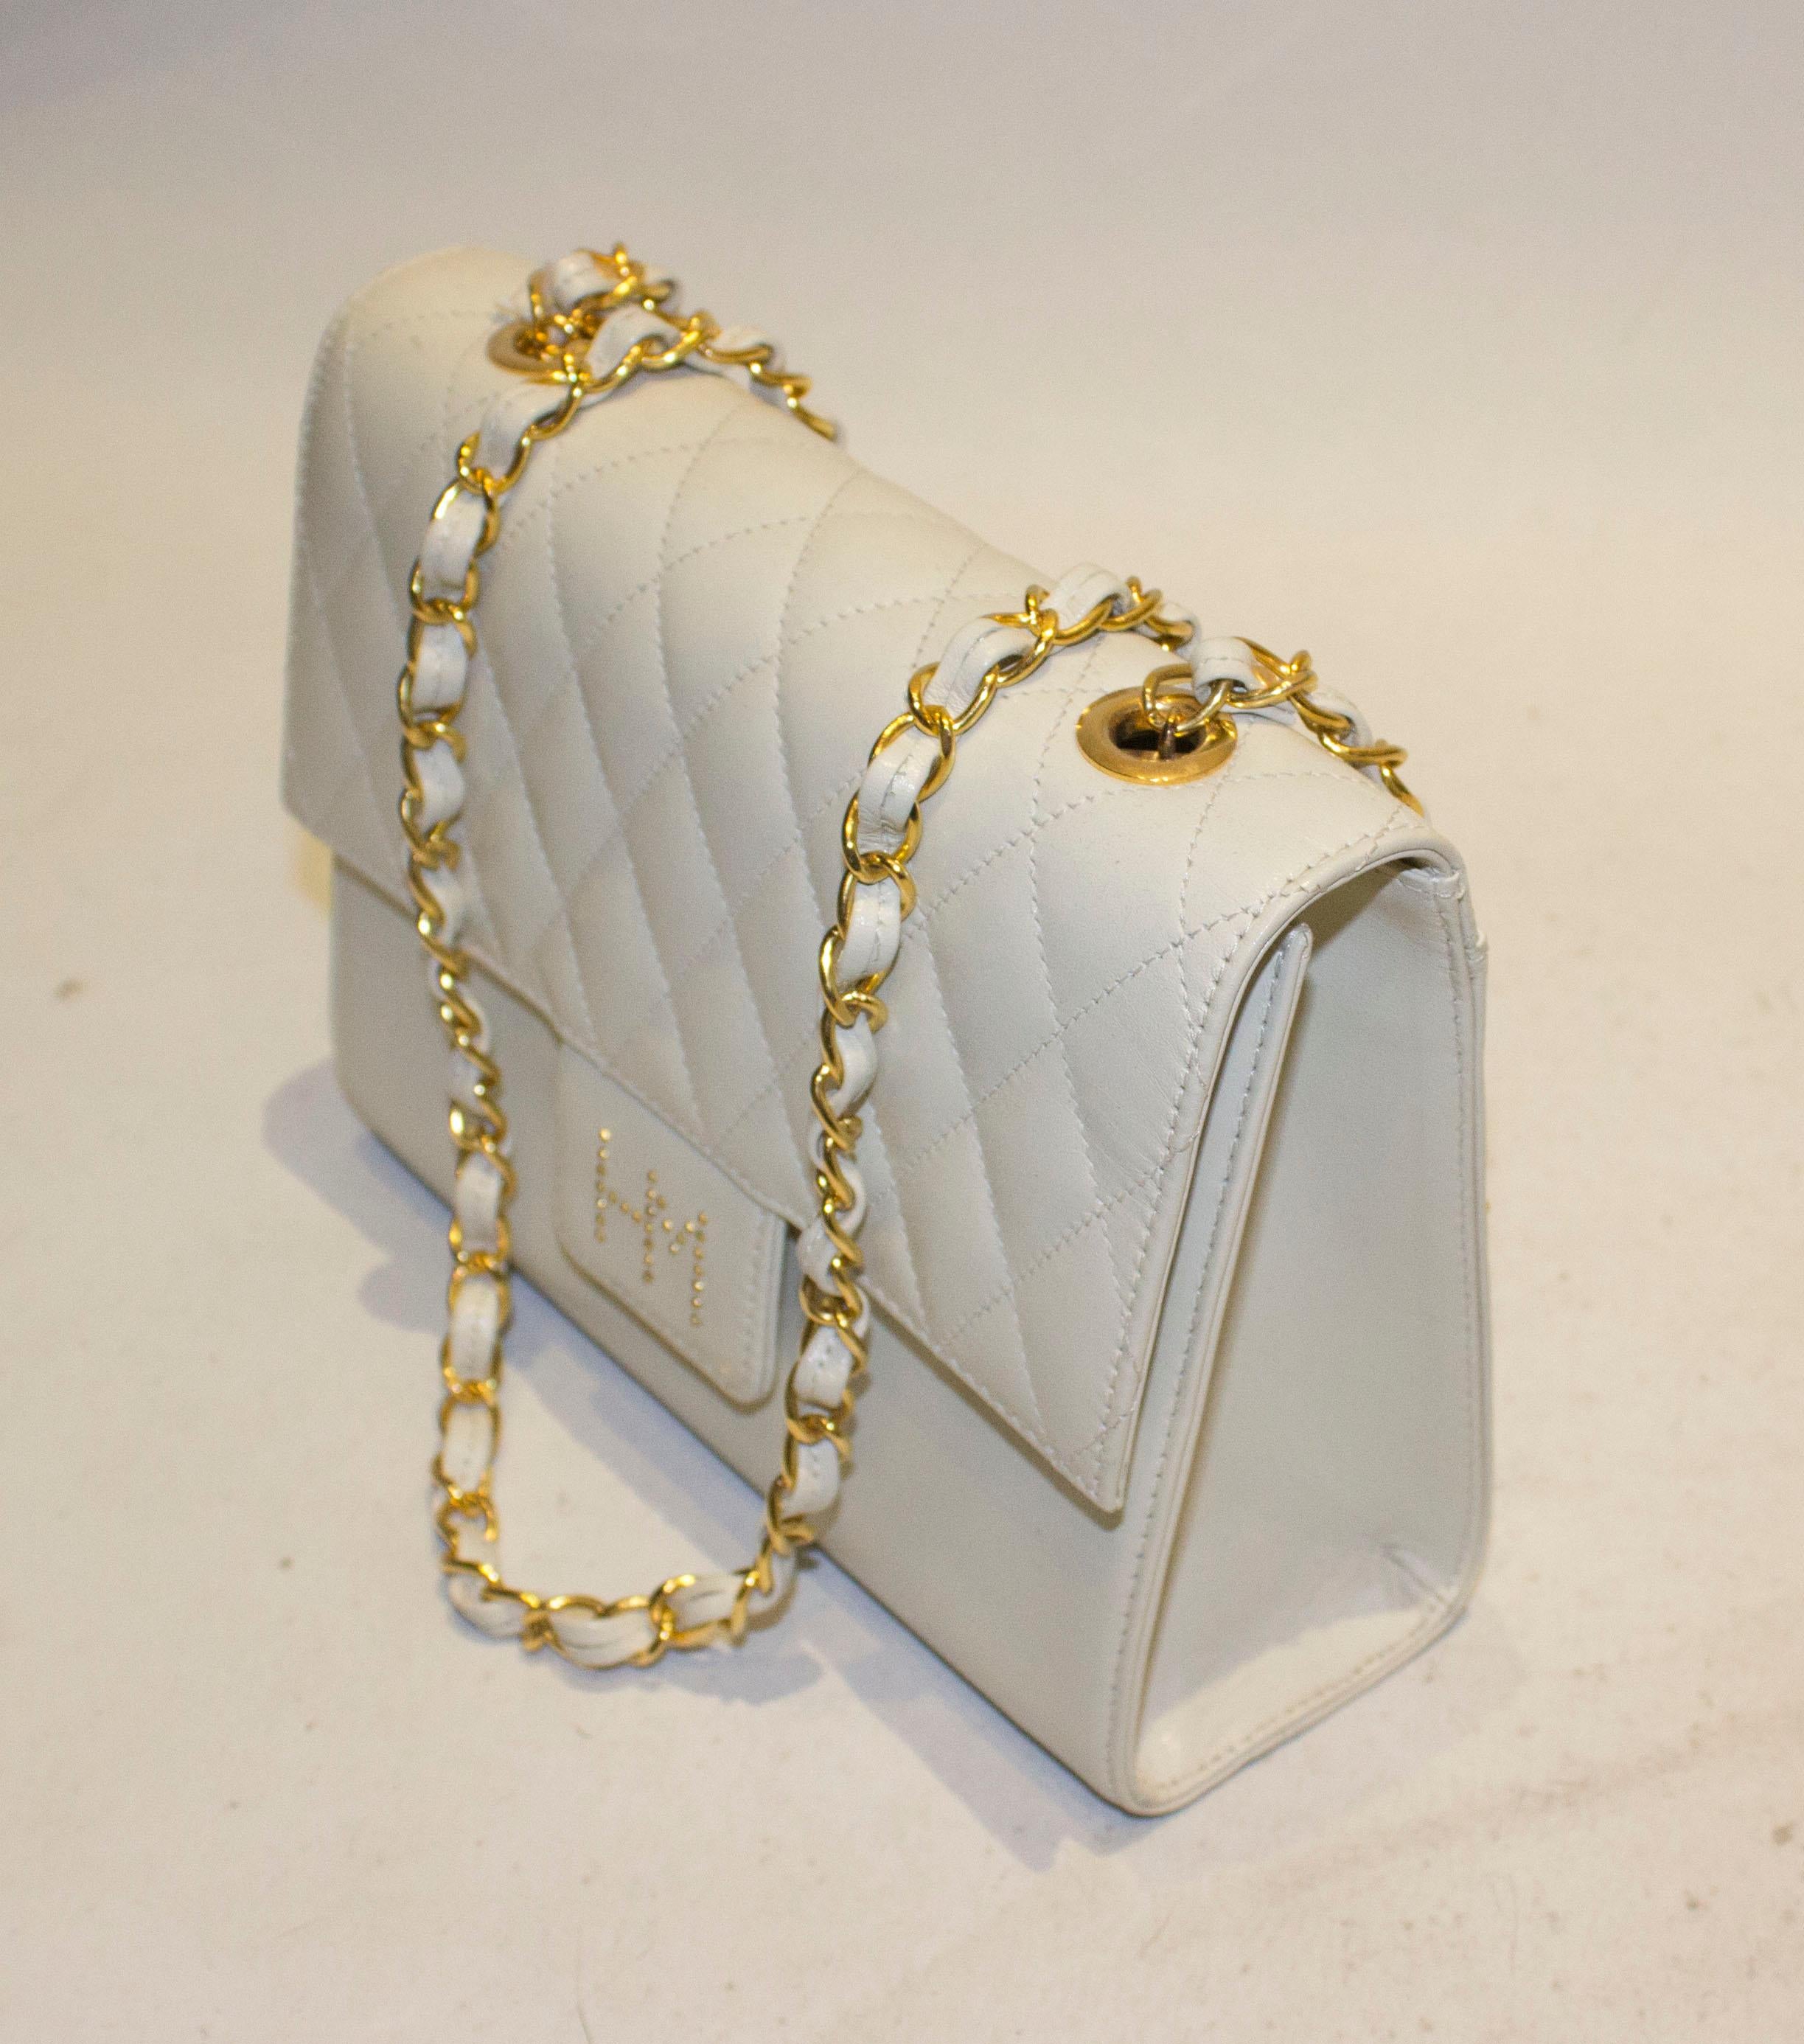 A chic vintage bag by Hanae Mori. The white leather bag has a quilted flap over front with popper fastening.  There is one internal pouch pocket and a pouch on the reverse, the bag has a 42'' chain handle. Measurements  width 8'', height 6'' , depth